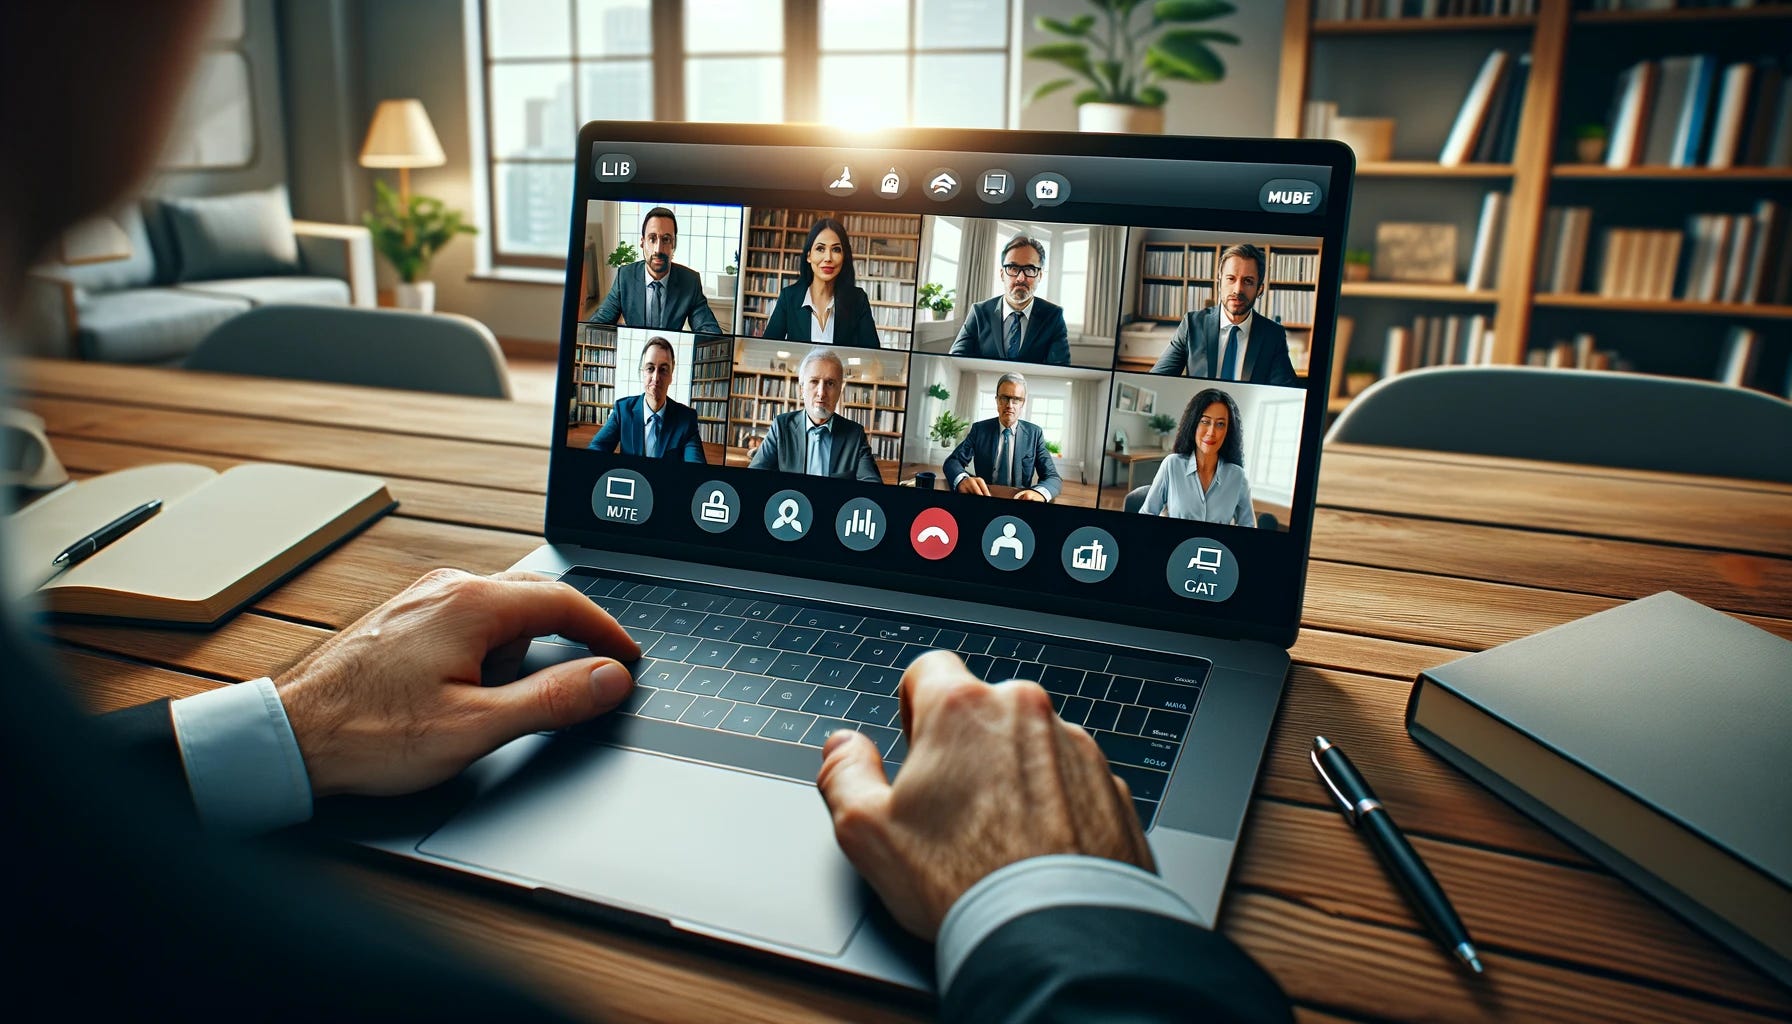 An image showing a professional video chat in progress from the viewpoint of looking over someone's shoulder at a laptop screen. The laptop screen displays a neatly organized video conferencing interface with multiple participants, each in their own framed window. The participants are dressed in business attire, indicating a formal meeting or discussion. The user interface on the screen should include icons for mute, video, and chat functionalities, reflecting a modern and sophisticated video conferencing tool. The background beyond the laptop shows a home office setting, with a bookshelf and indoor plants, blending professionalism with a personal touch.